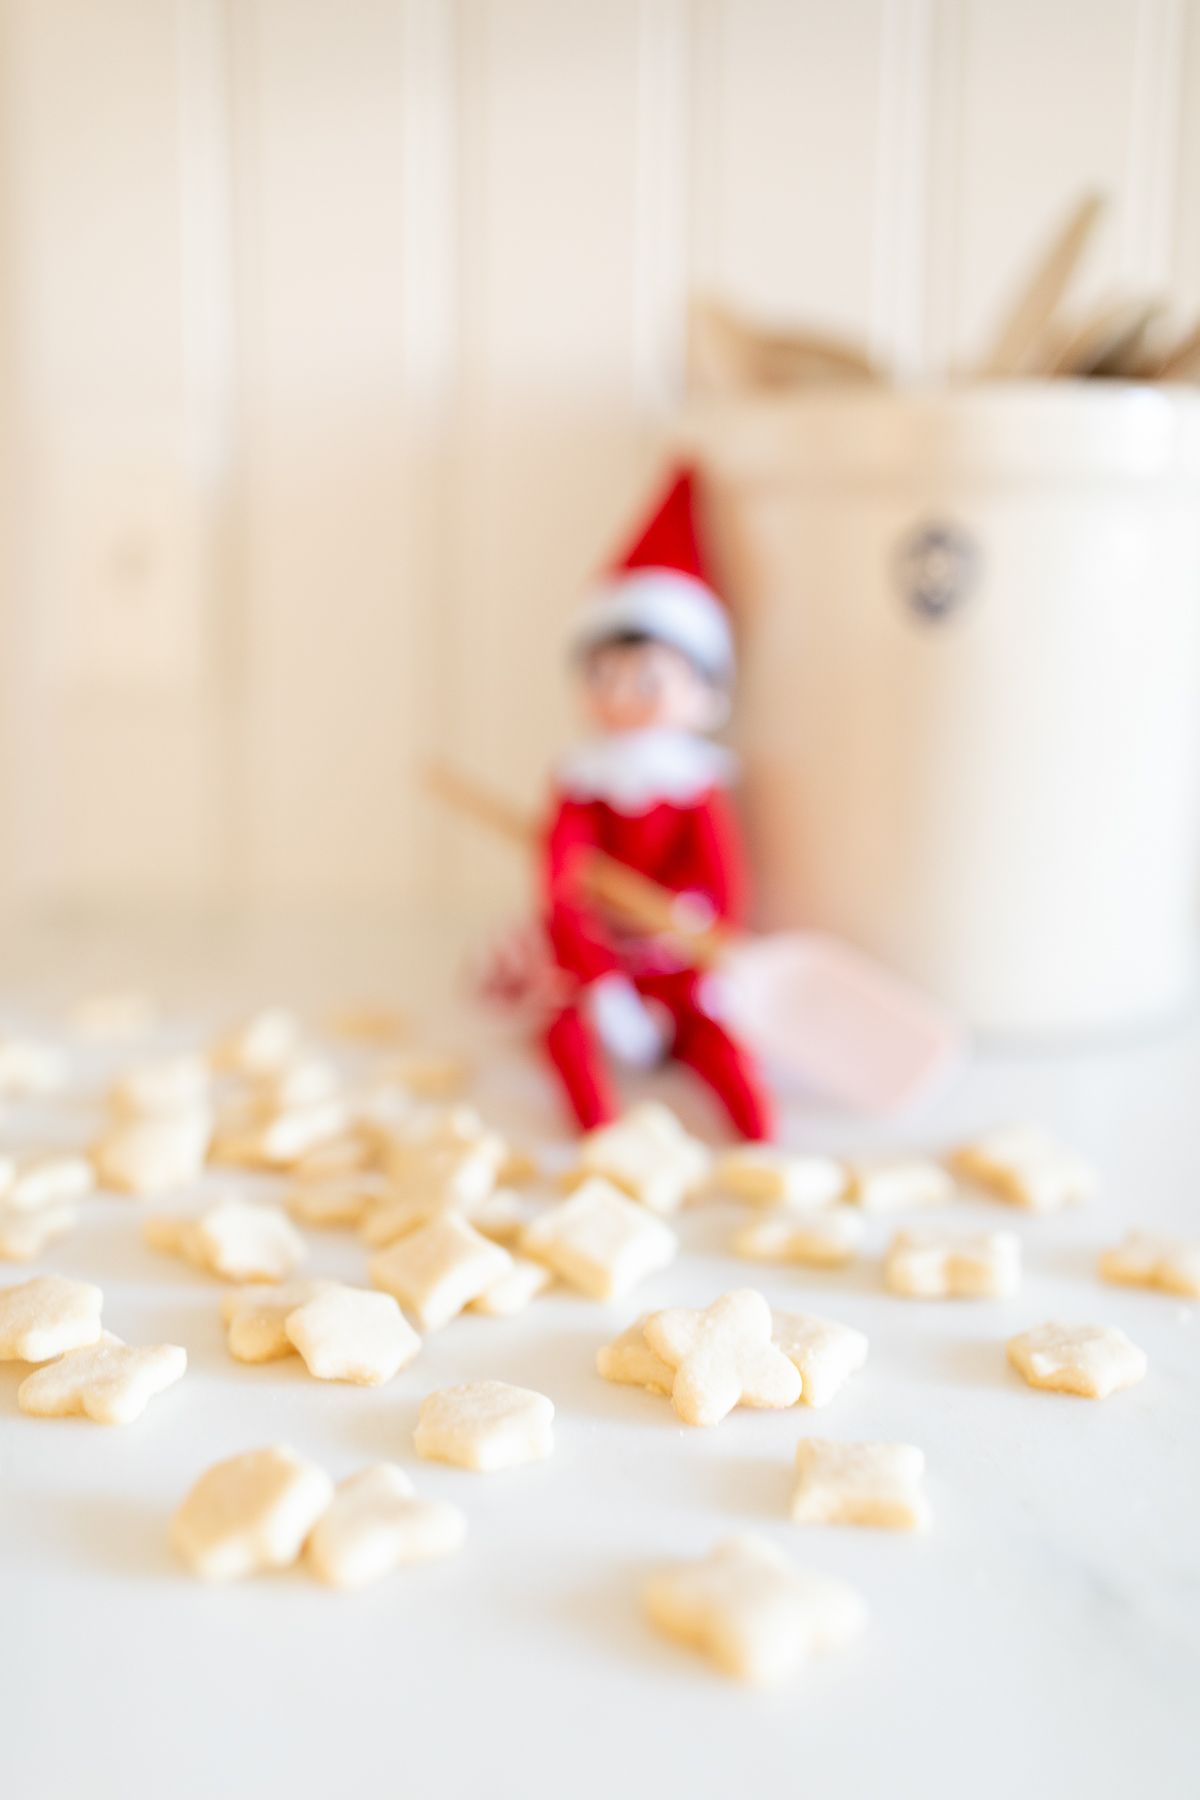 An elf on the shelf sitting on a kitchen counter, with tiny shortbread elf on the shelf cookies surrounding her.